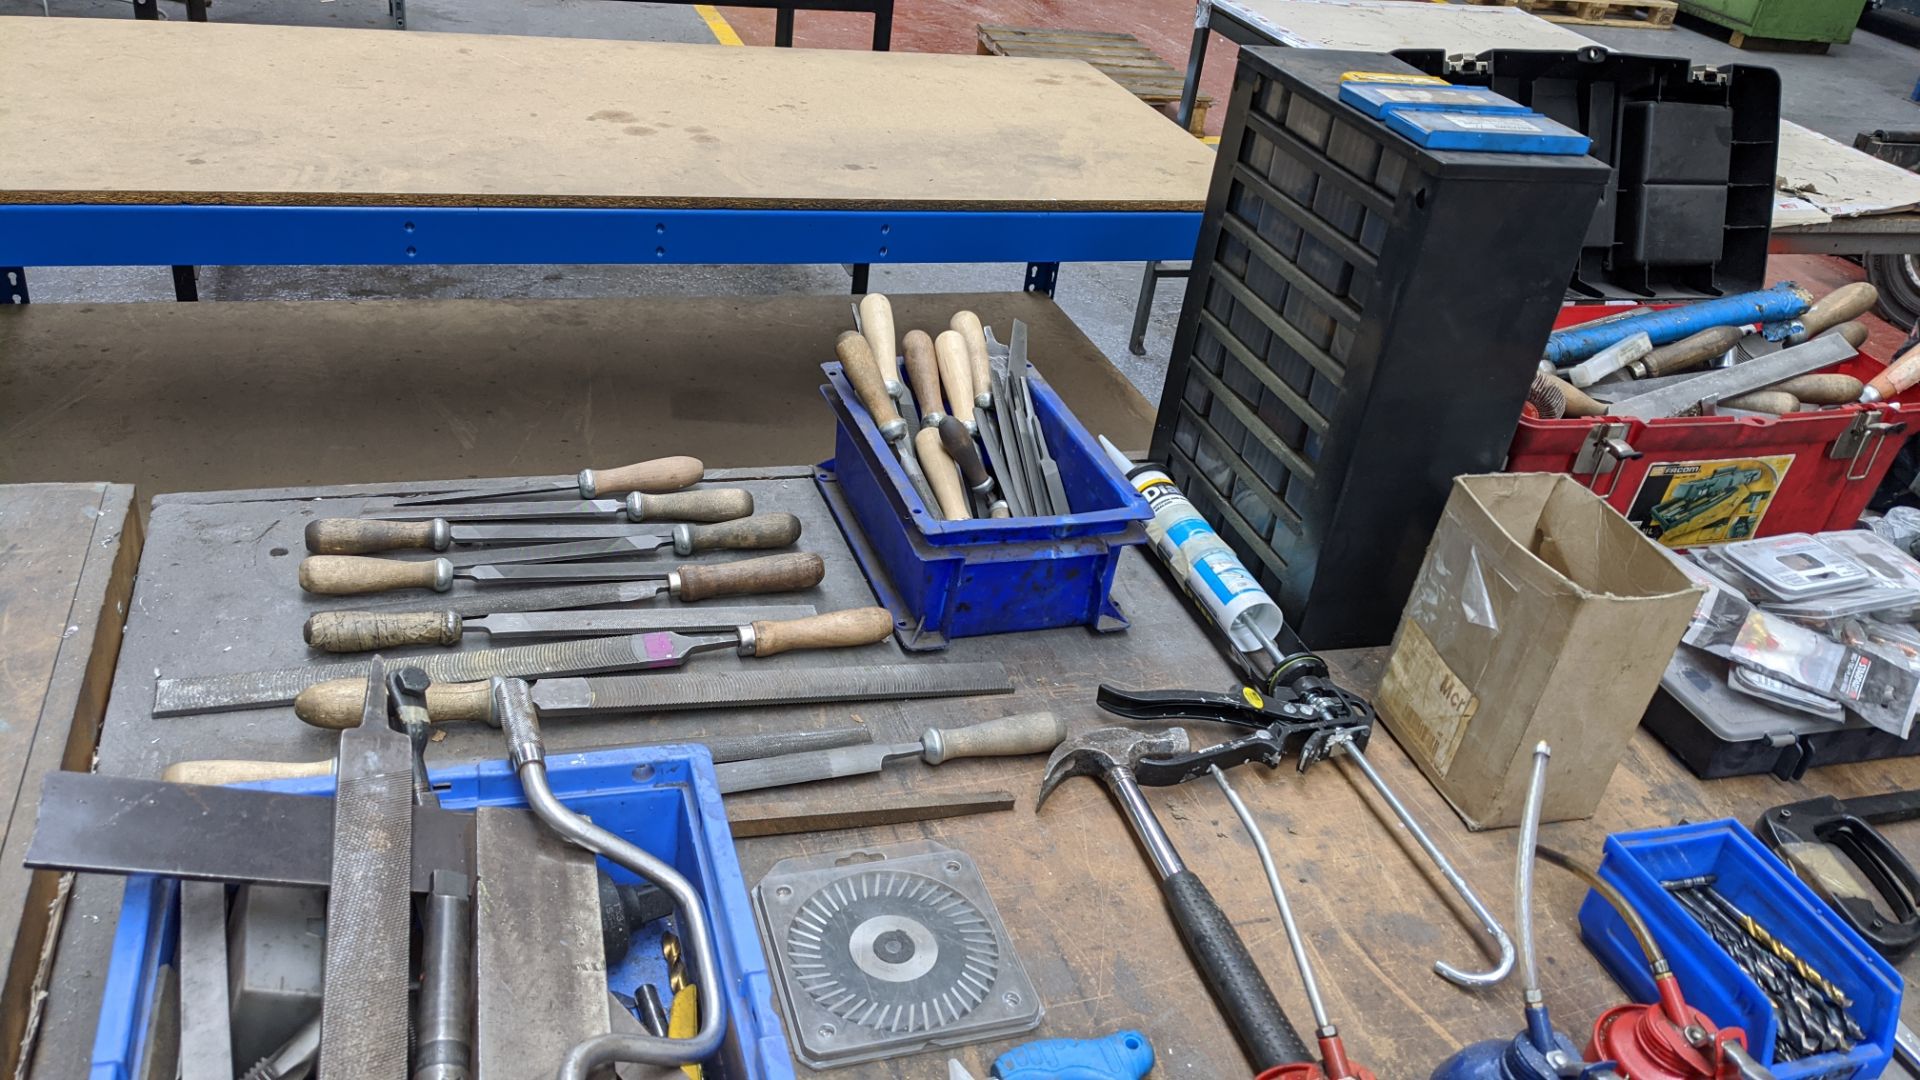 Bench & contents including vice, hand tools, riveting equipment, face masks & other PPE, chisels & - Image 7 of 12